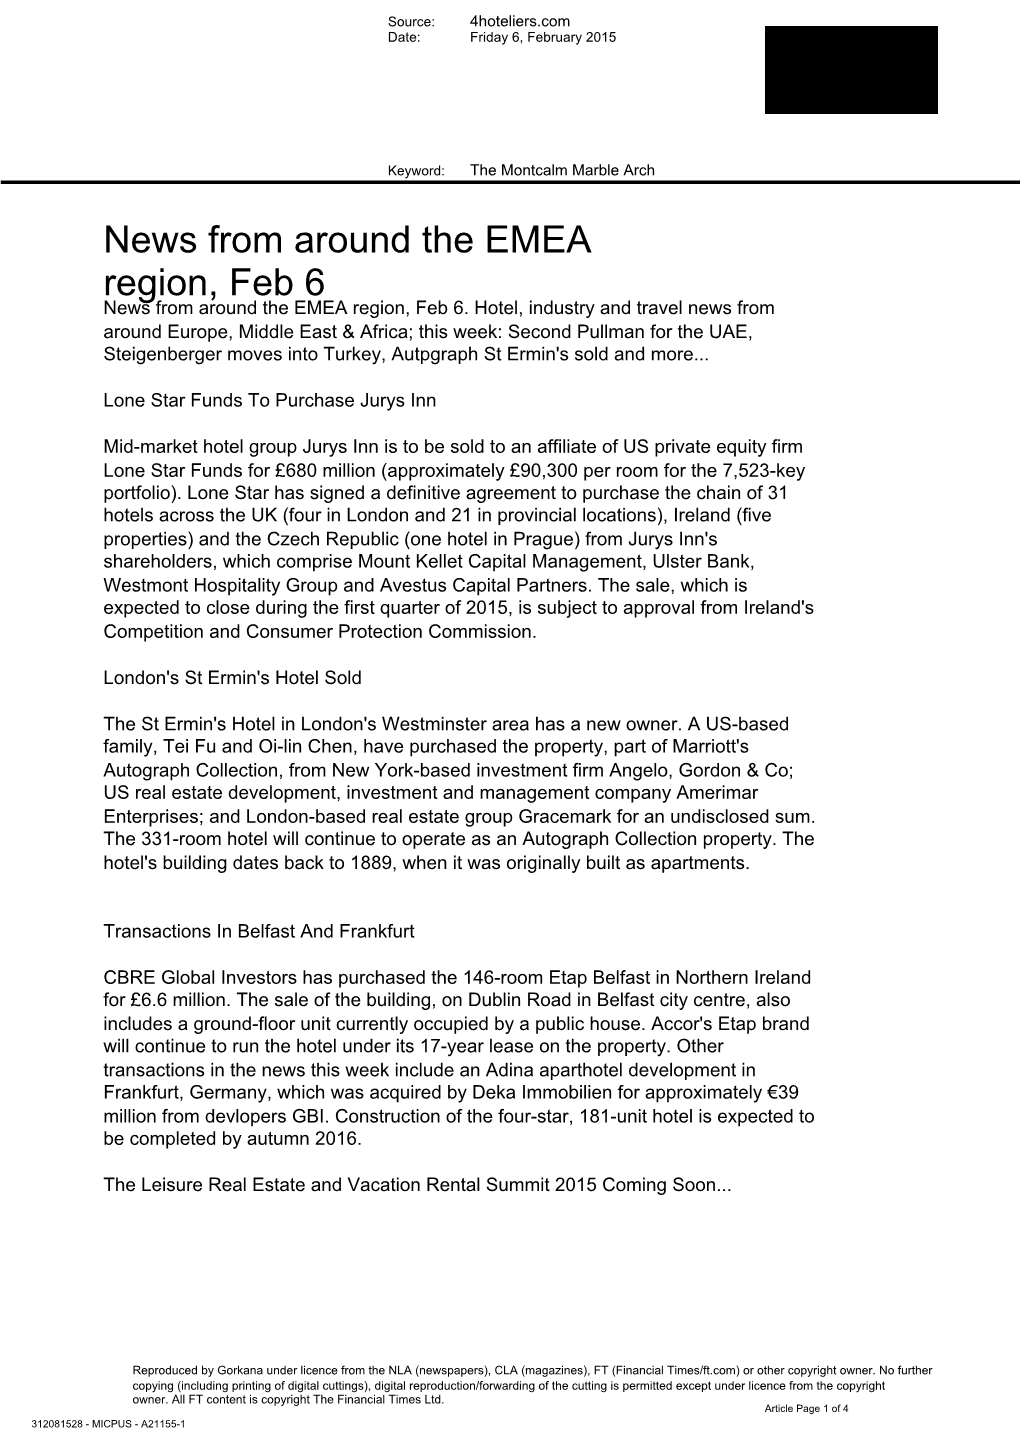 News from Around the EMEA Region, Feb 6 News from Around the EMEA Region, Feb 6